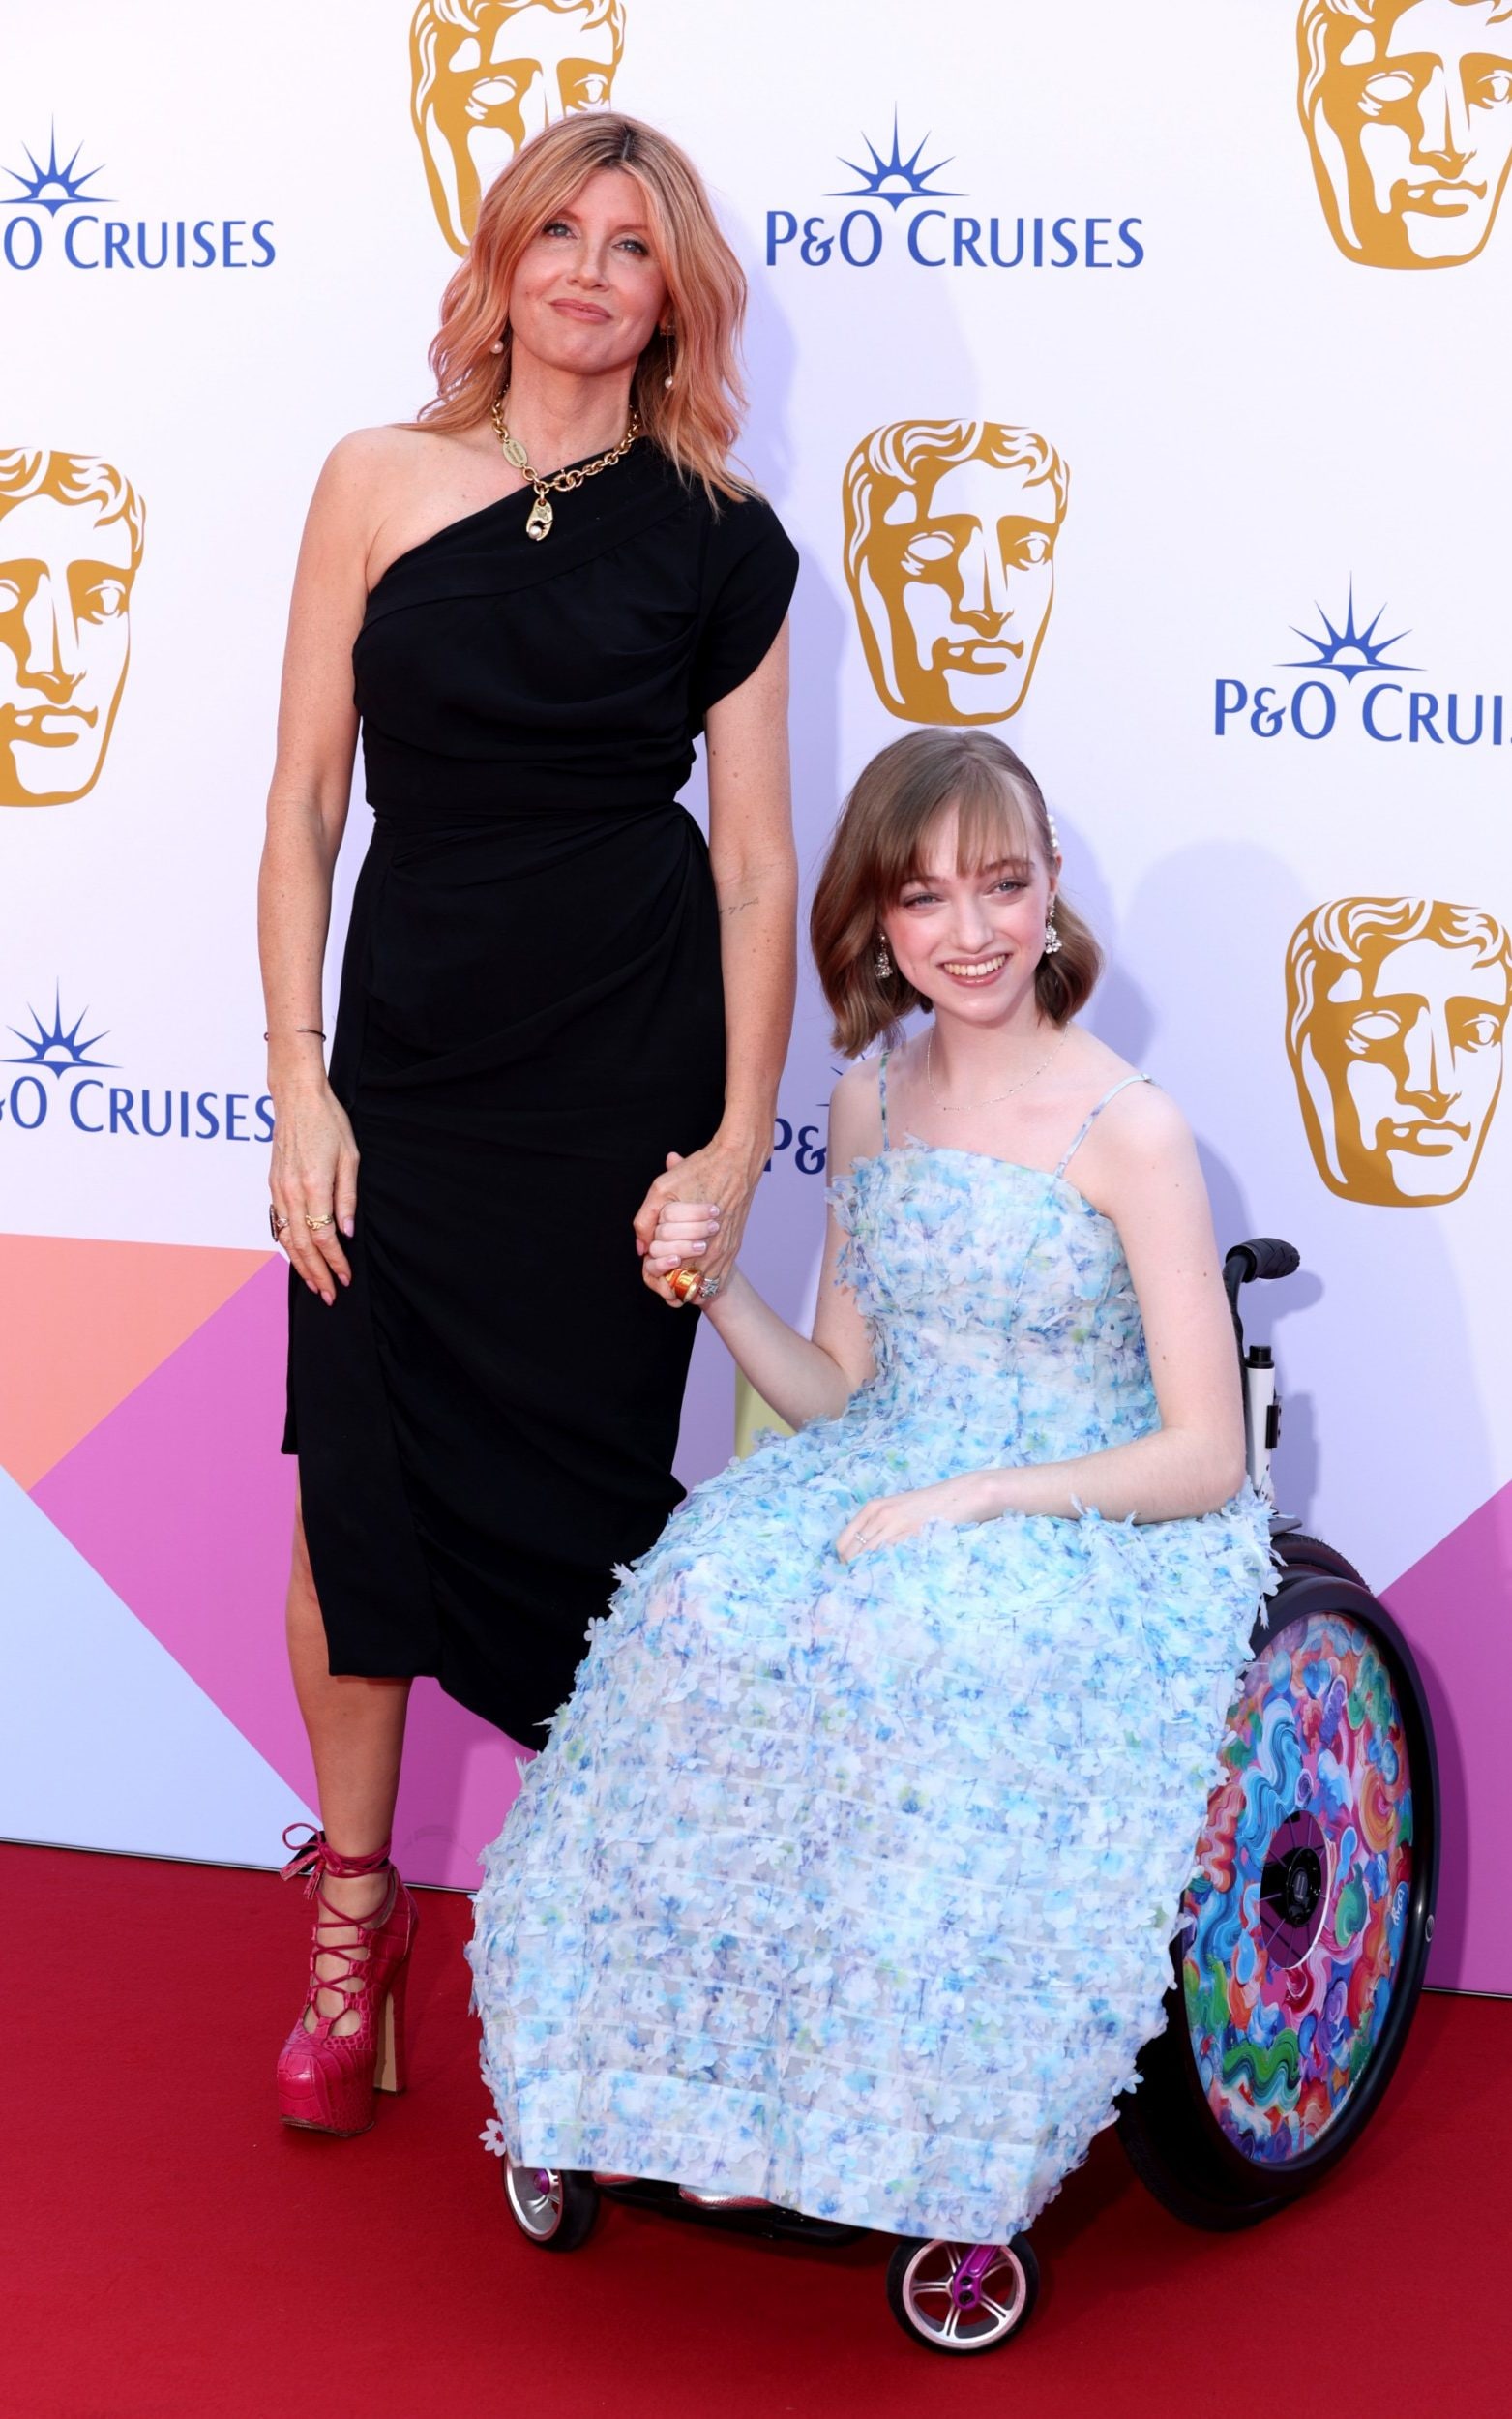 <p><p>Sharon Horgan took to the red carpet in a pair of towering pink Vivienne Westwood platforms and a one-shoulder LBD. She matched her shoes to her hair with a subtle pink rinse. </p><p>She was accompanied on the red carpet by her Best Interests co-star, Niamh Moriarty who wore a beautiful pale blue dress. </p></p>